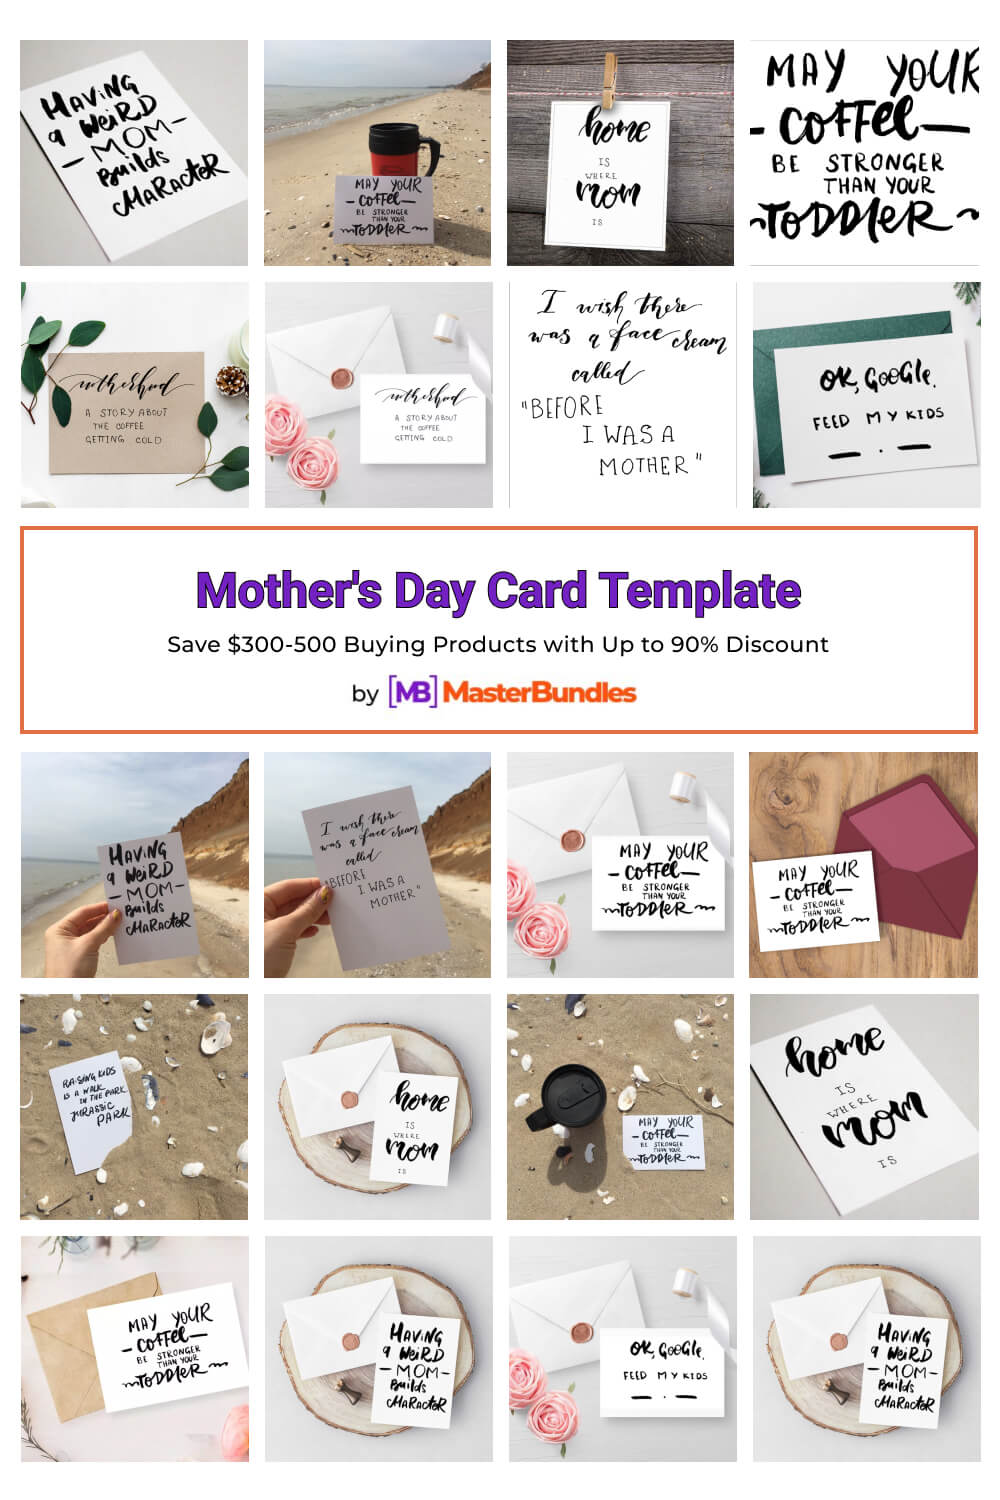 mothers day card template pinterest image.